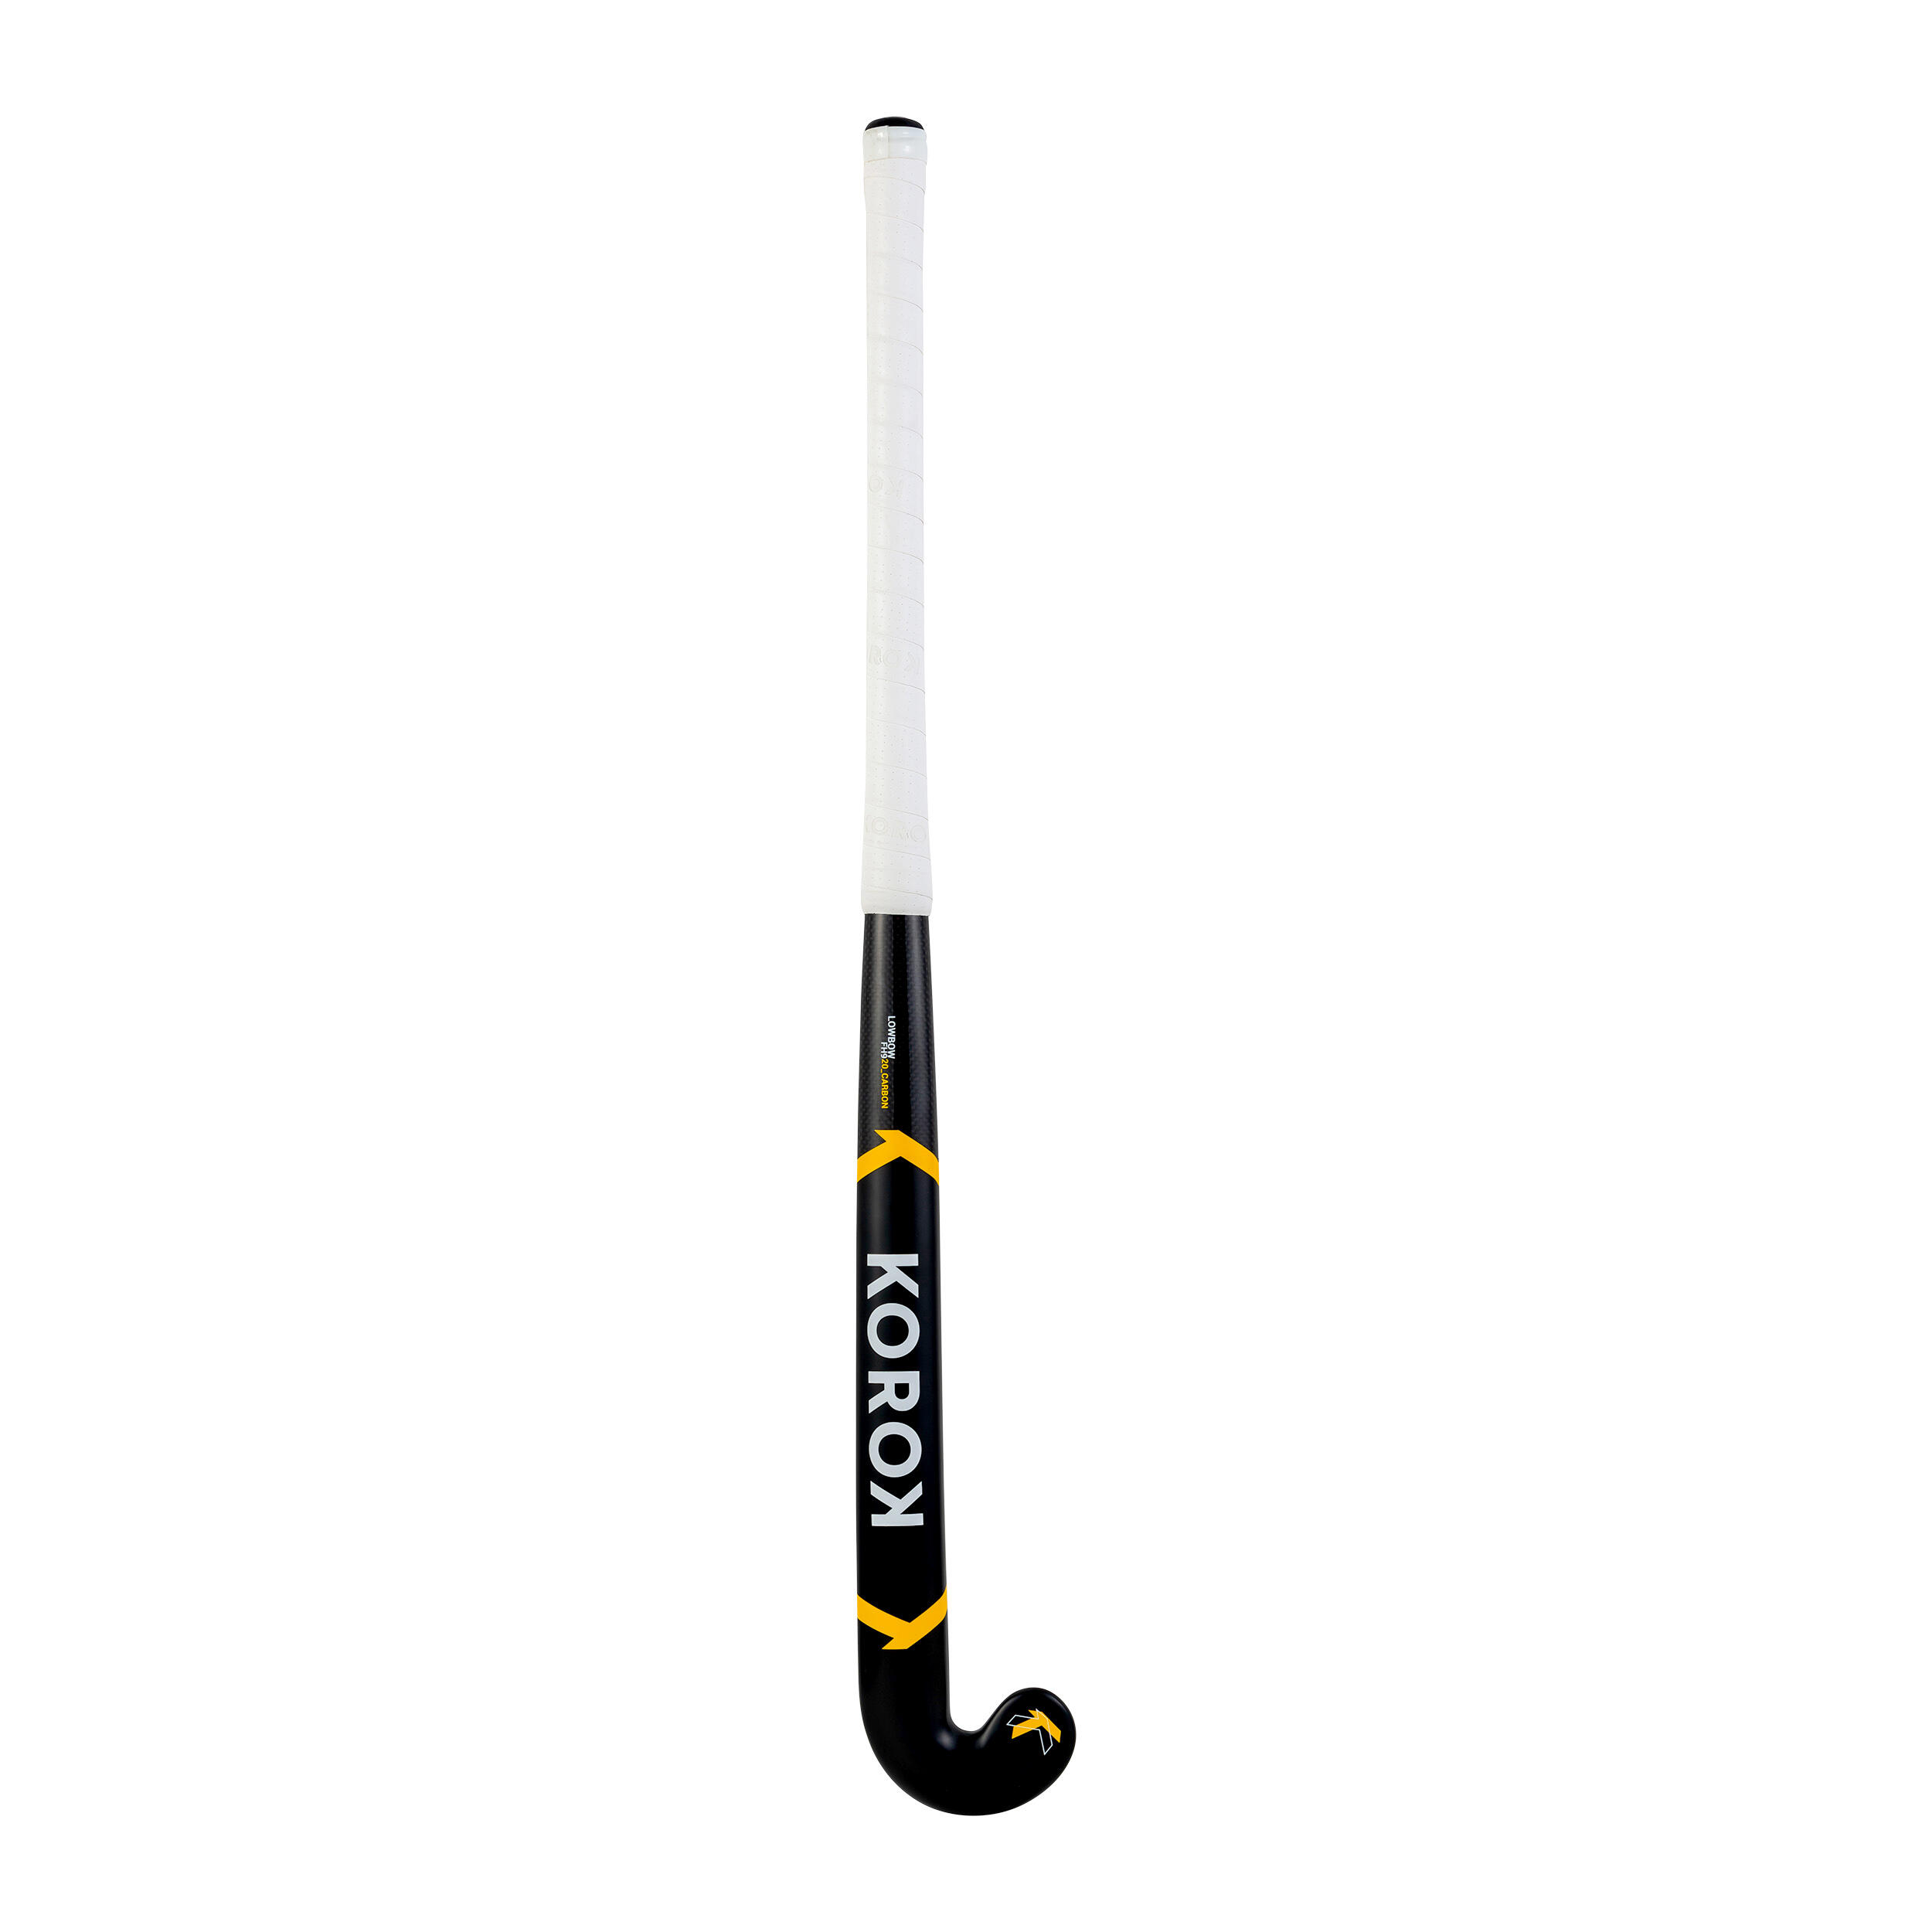 Kids' 20% Carbon Low Bow Field Hockey Stick FH920 - Black/Yellow 10/12